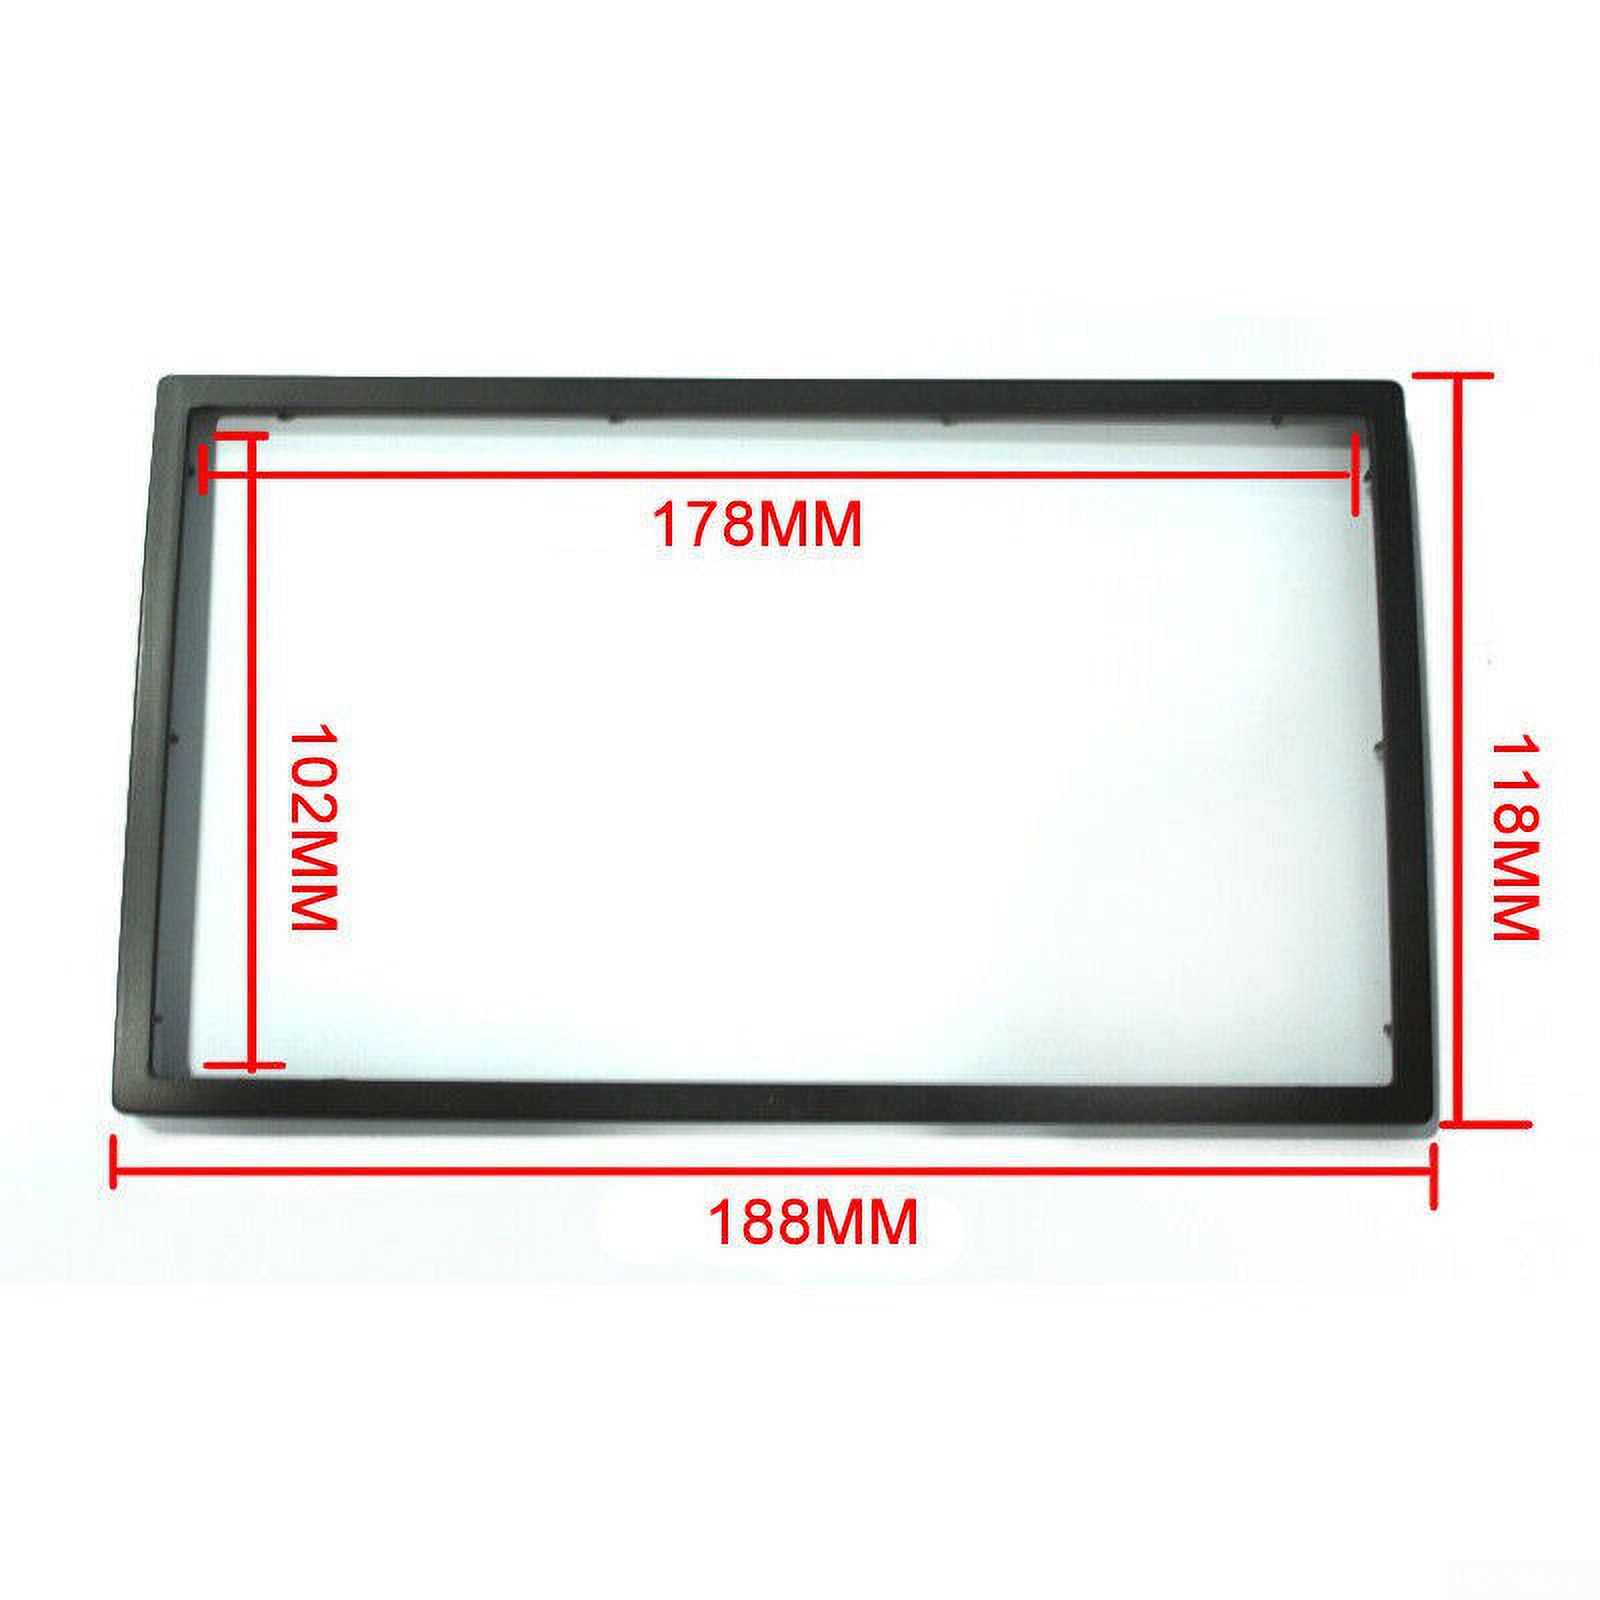 UHUSE 2Din Stereo Audio Dash Bezel Panel Mounting Frame for Car Radio DVD Player - image 5 of 6